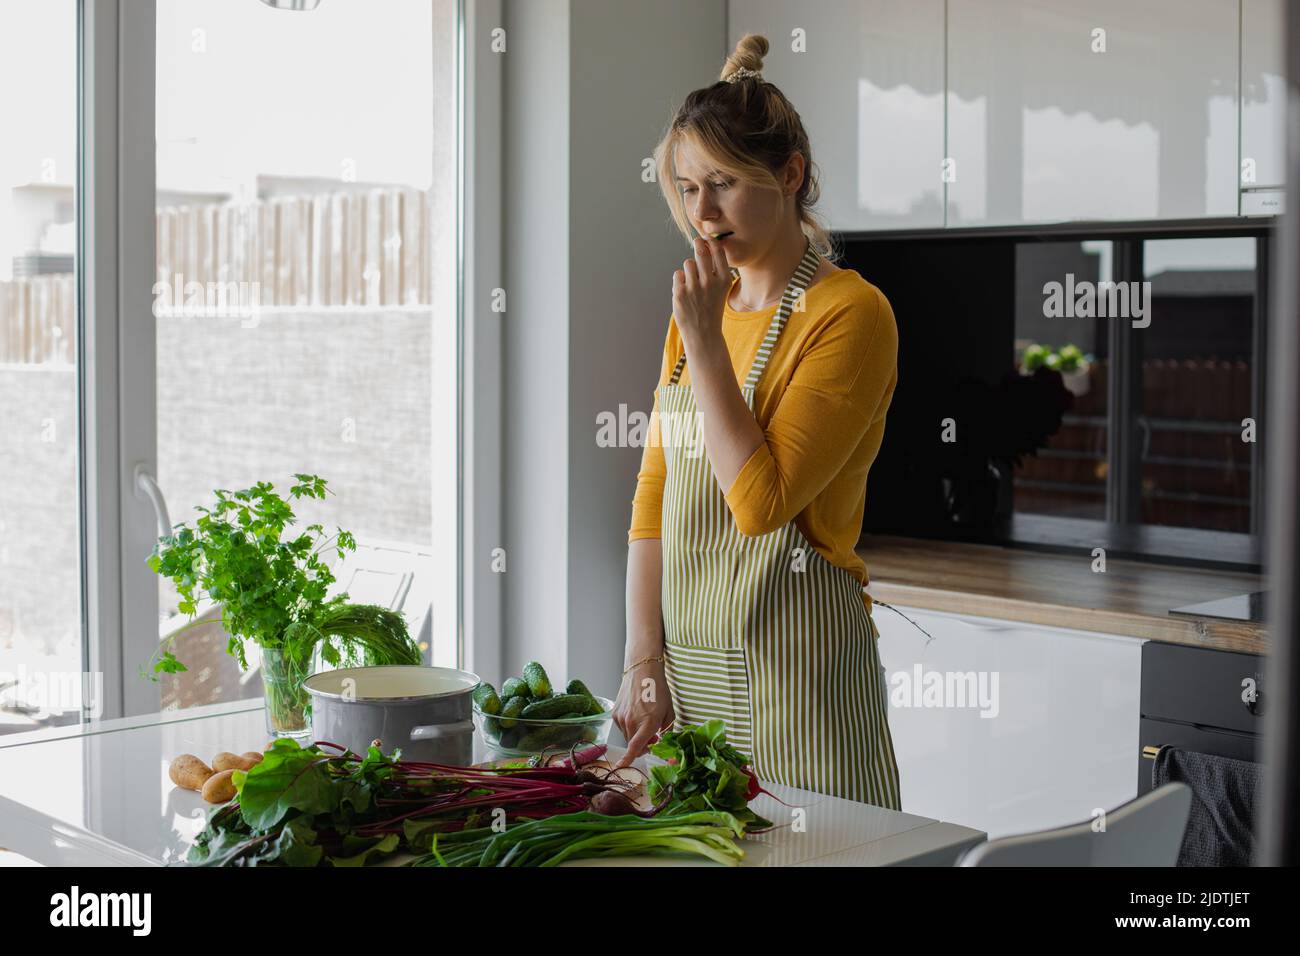 Concentrated woman in apron tasting cucumber, choosing vegetable receipt to cook in the kitchen. Diet, loosing weight Stock Photo